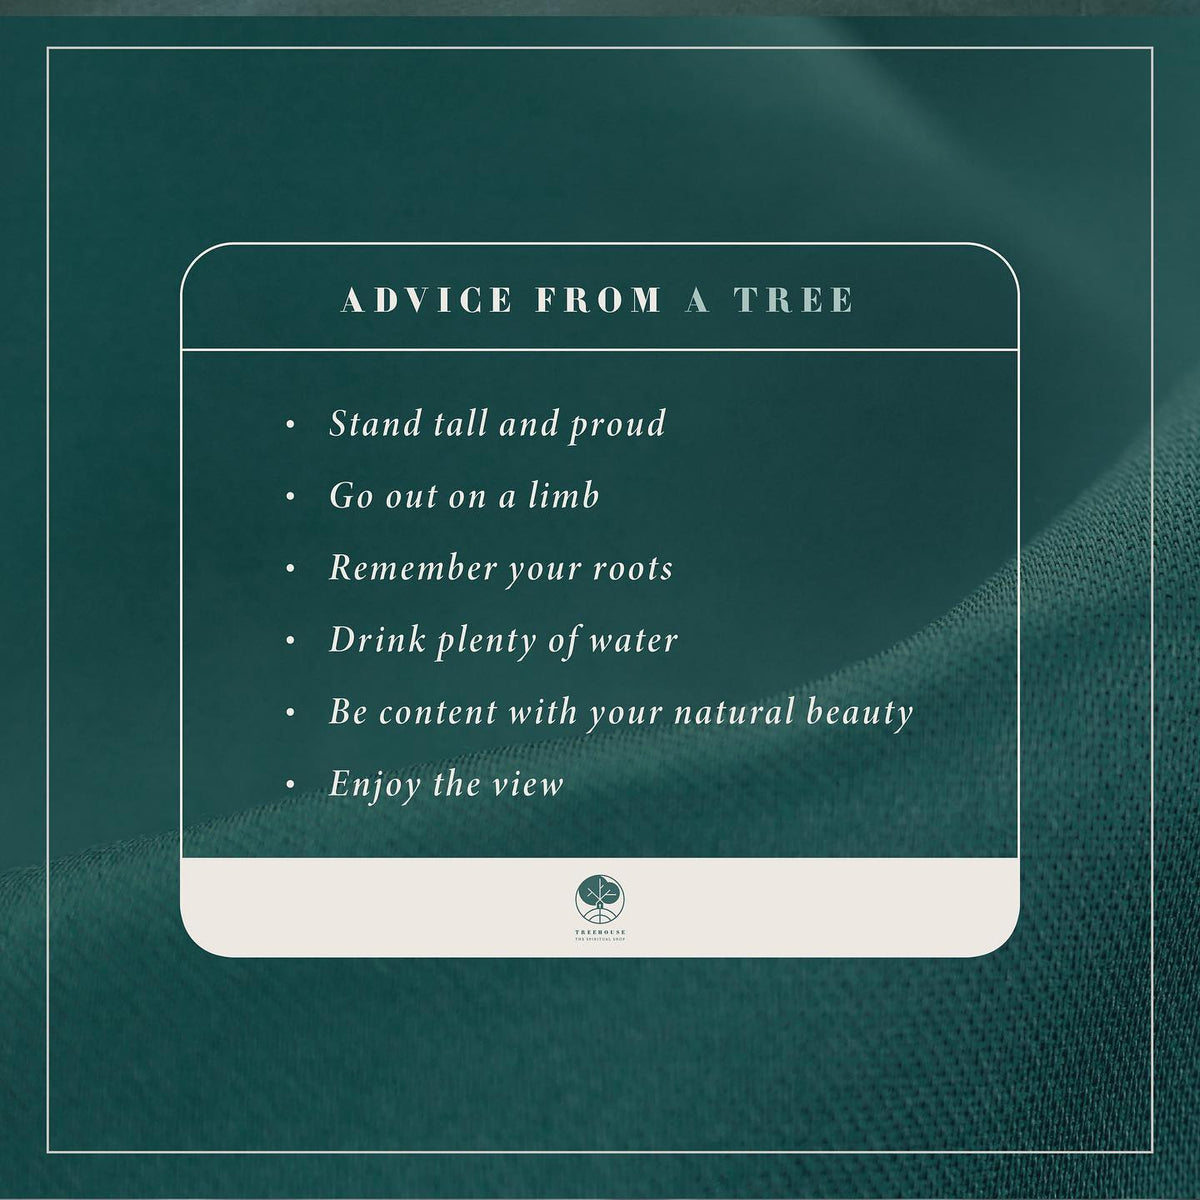 Advice from a tree